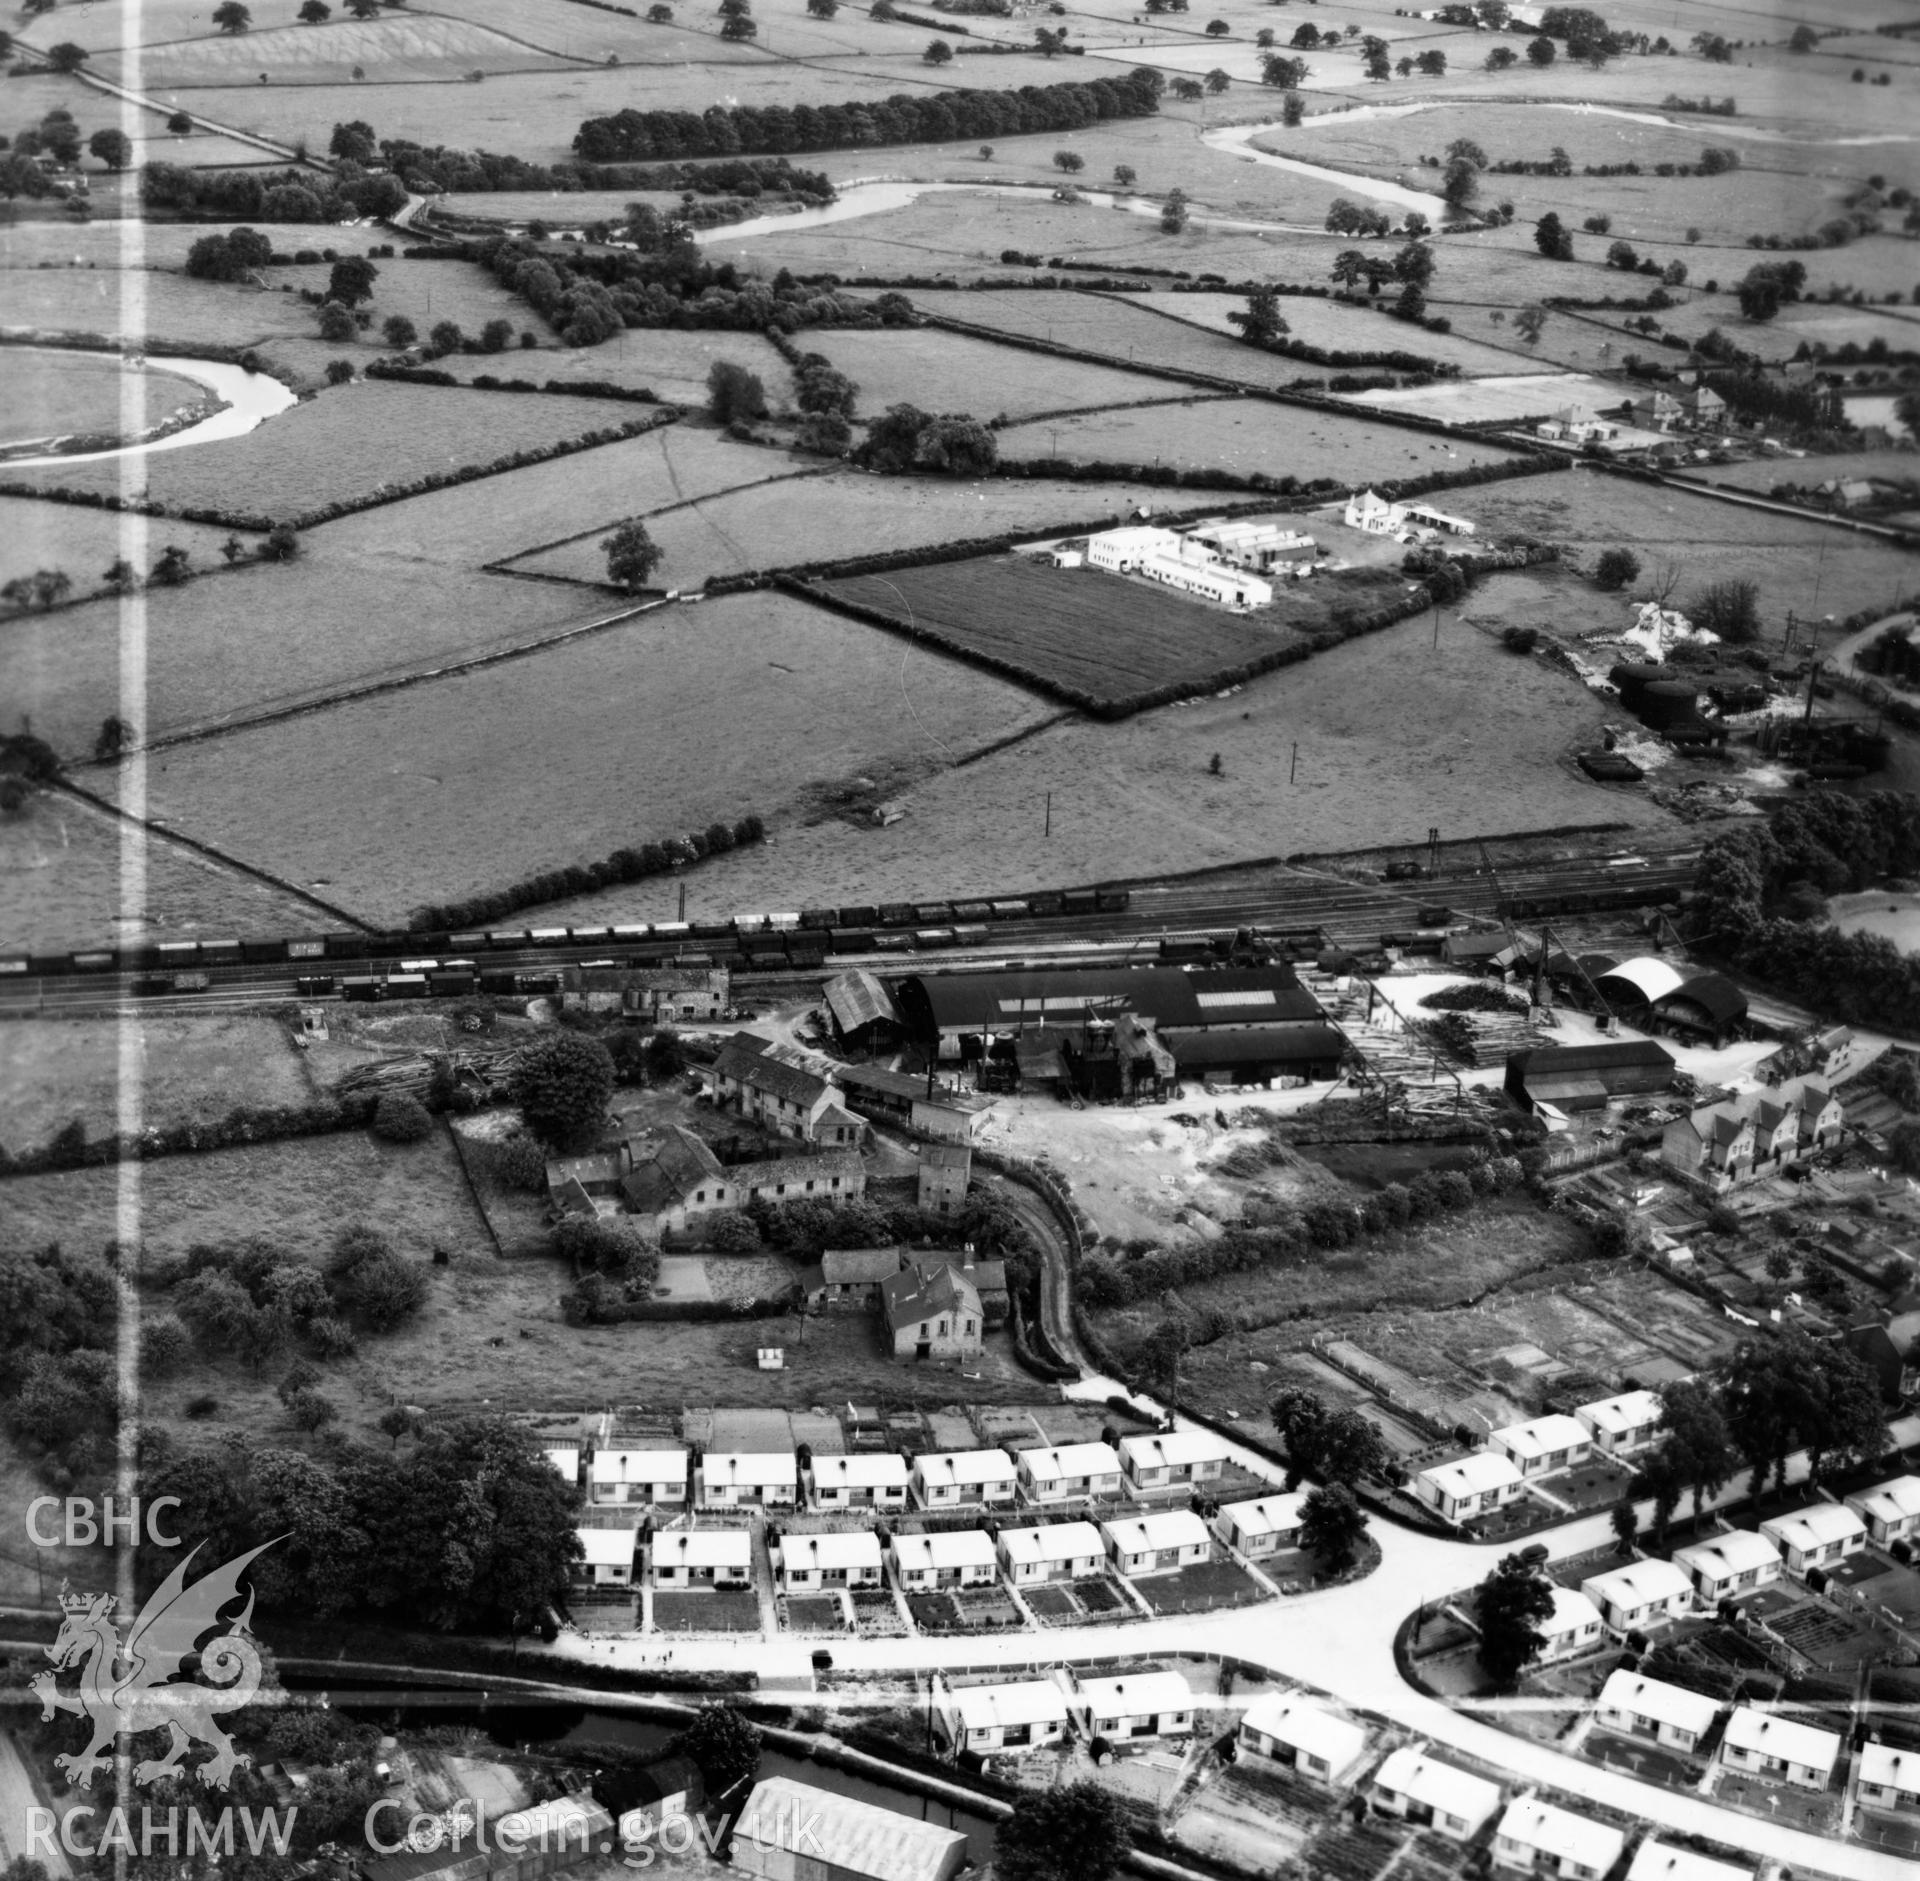 View of Welshpool showing Boys & Boden Ltd., Mill Lane, and prefab bungalows. Oblique aerial photograph, 5?" cut roll film.